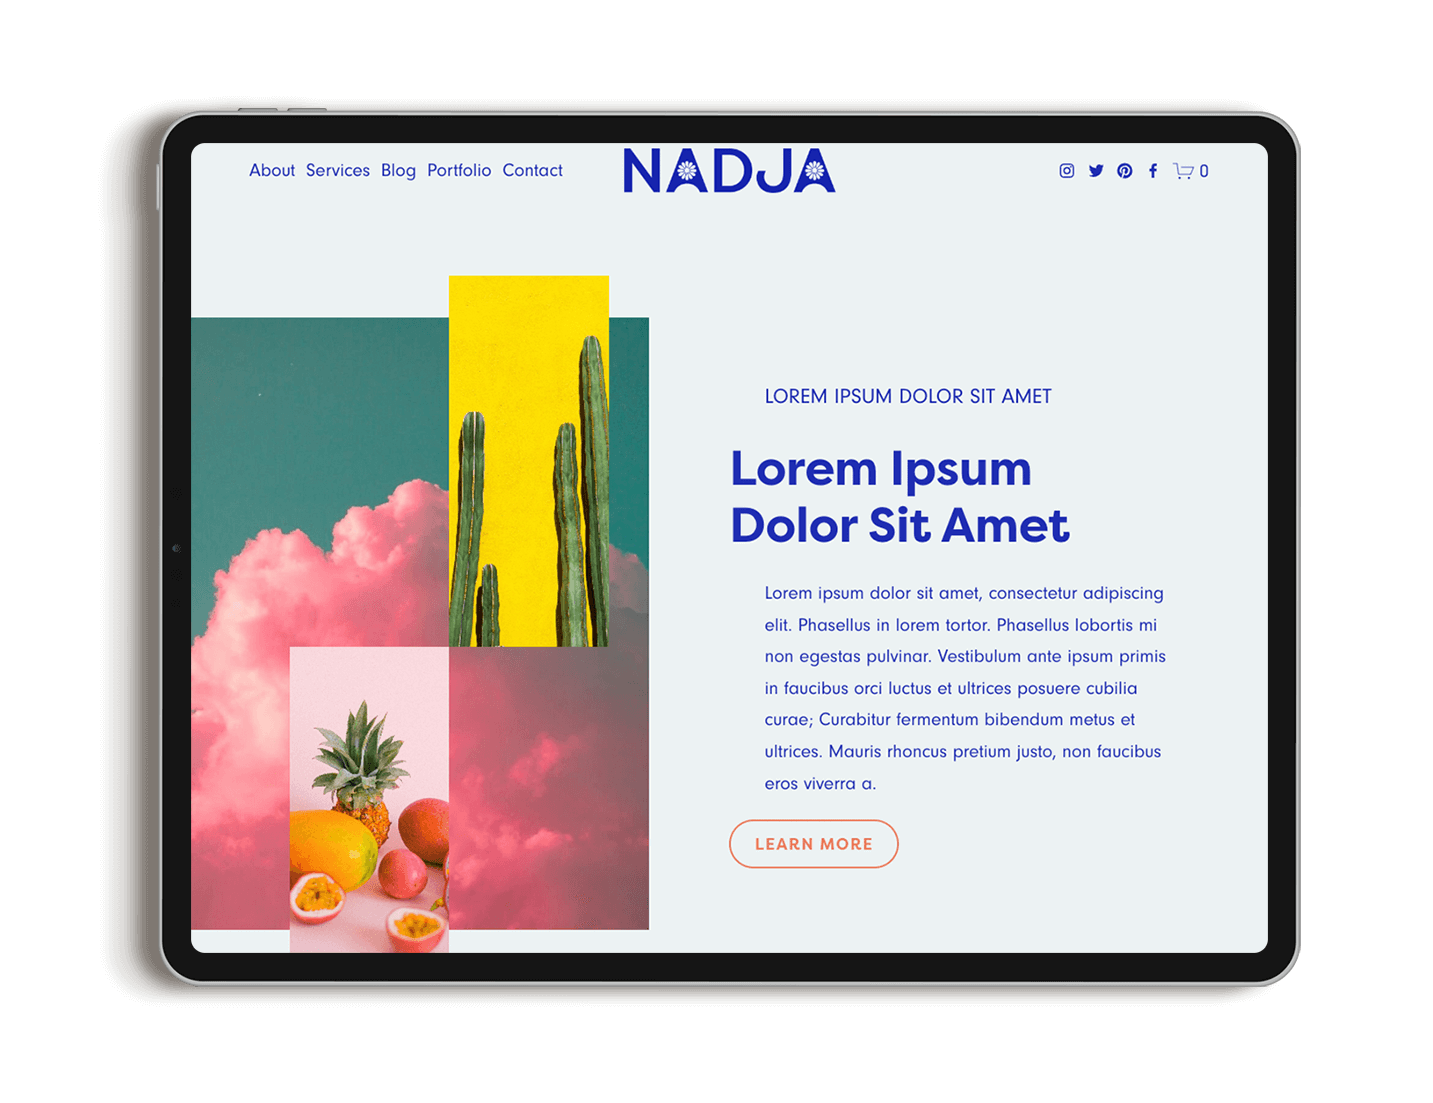 folk-founded-squarespace-website-templates-nadja-ipad-8.png